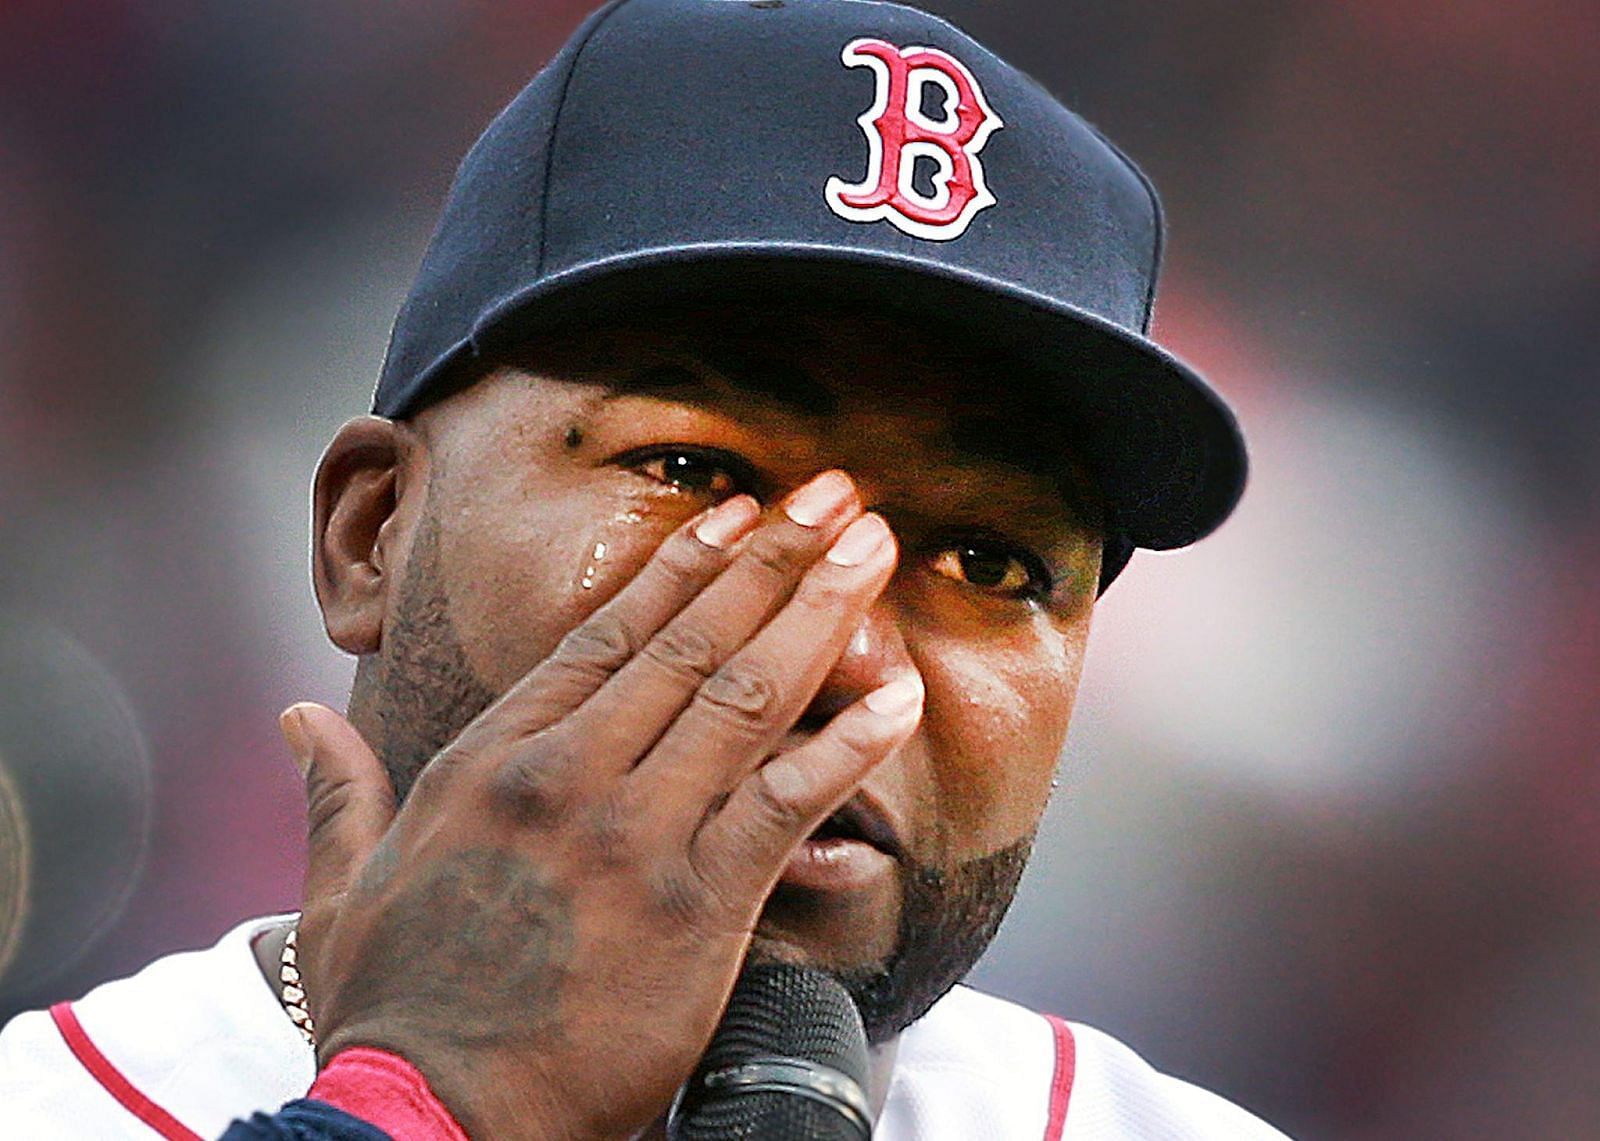 David Ortiz was in tears as he spoke to his fans before the game, remembering his mother. Source: Getty Images.